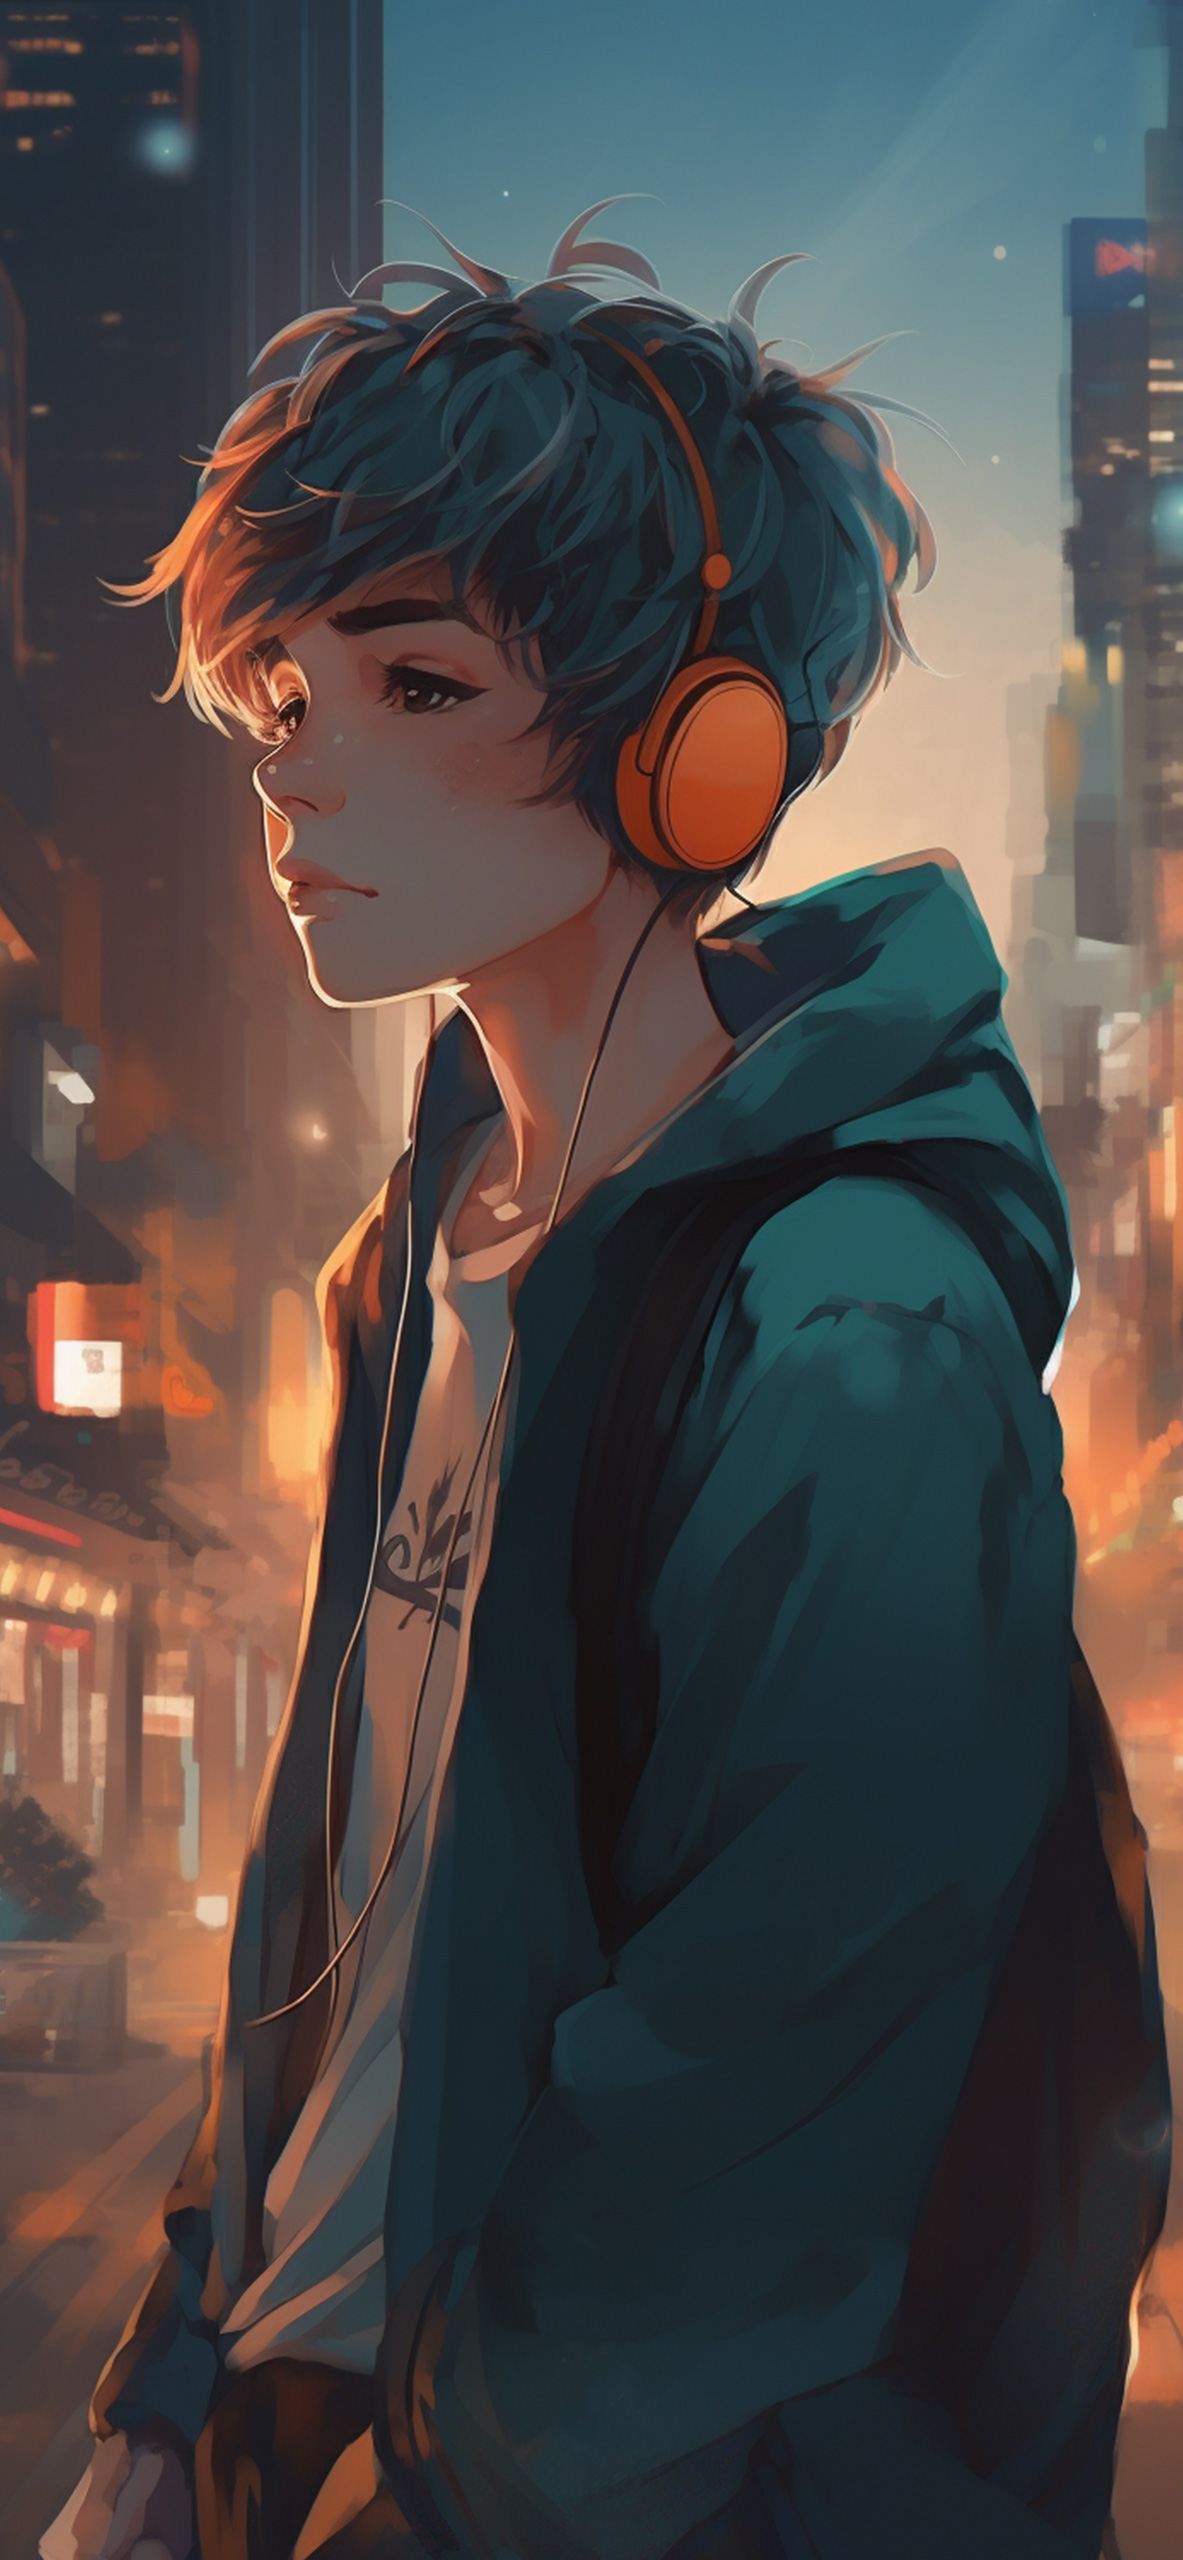 Aesthetic Anime Guy Wallpaper - Download to your mobile from PHONEKY